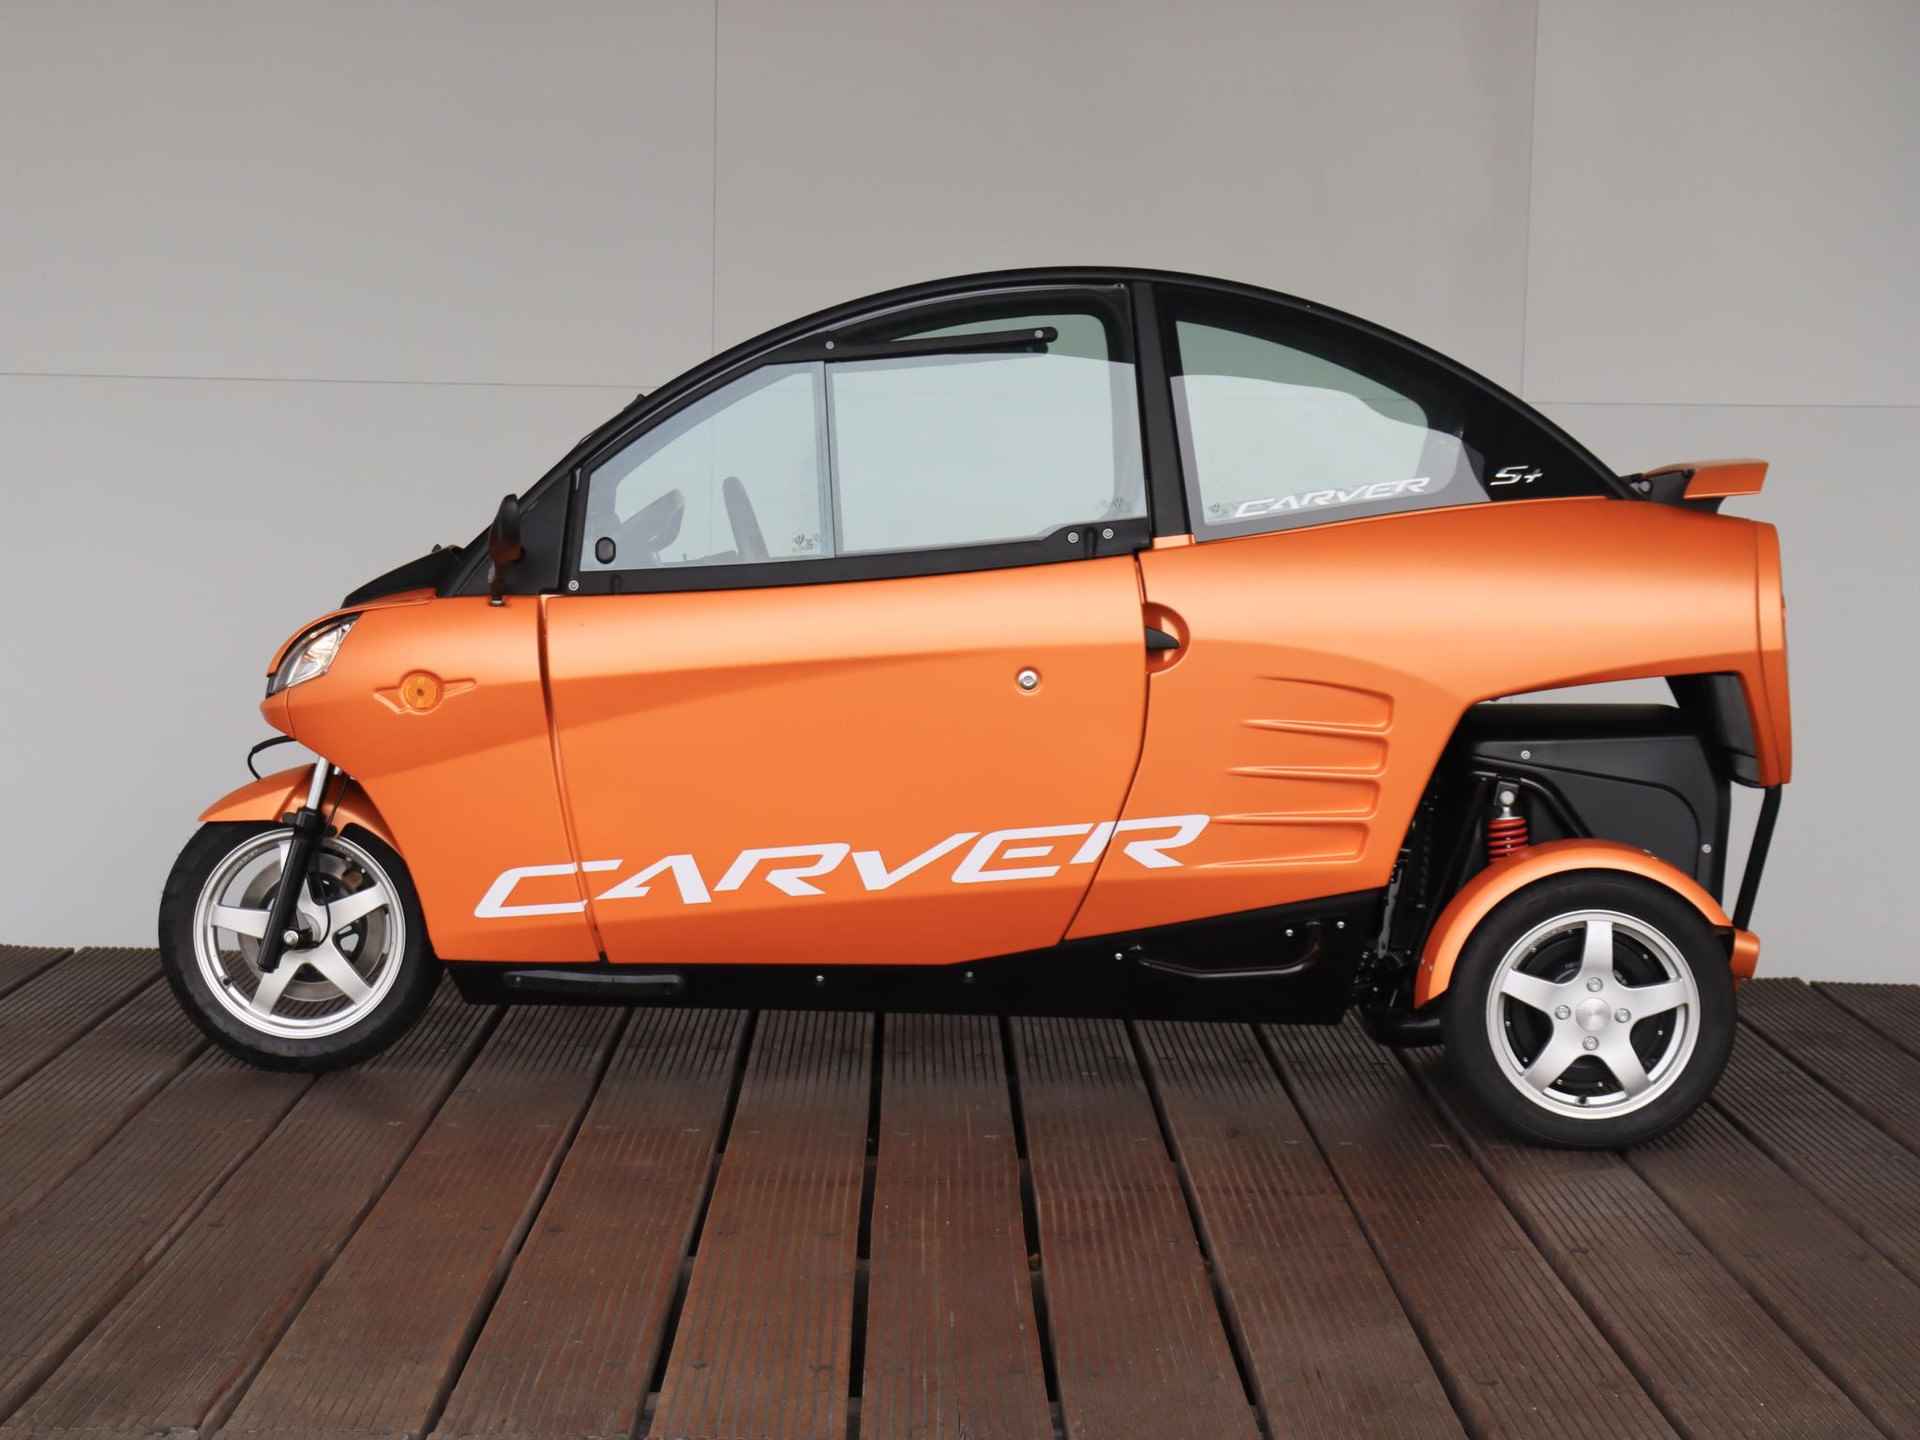 Carver 7.1 kWh S+ | 80 KM| 100% Electric | Bluetooth | Soft top | - 3/23